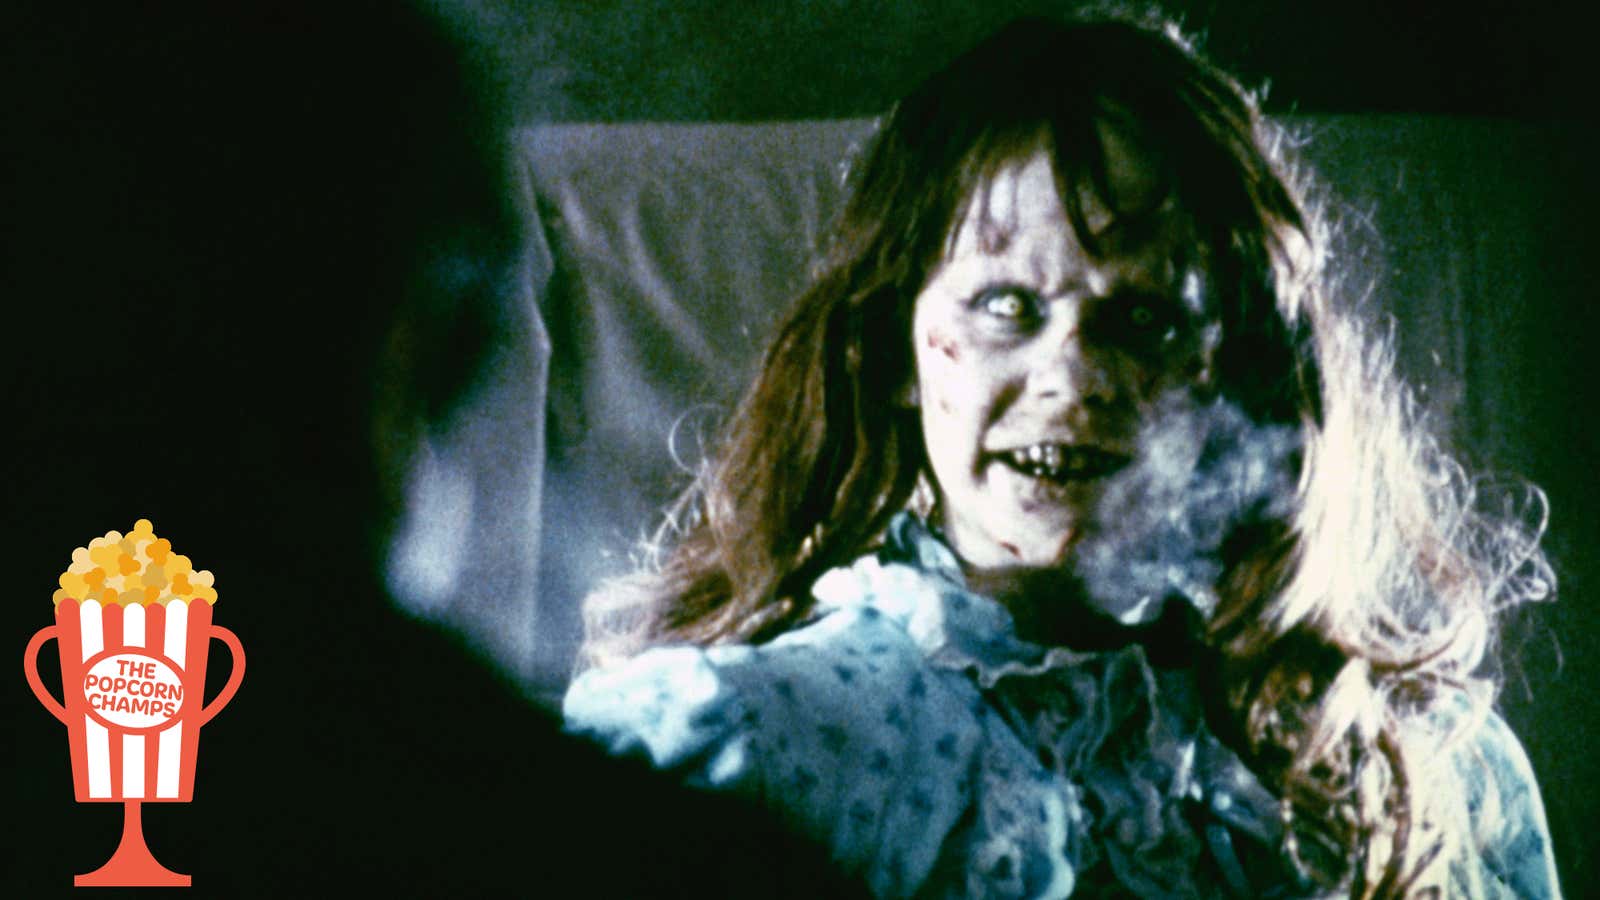 For all its blood, vomit, and obscenities, <i>The Exorcist</i> was a blockbuster of traditional values